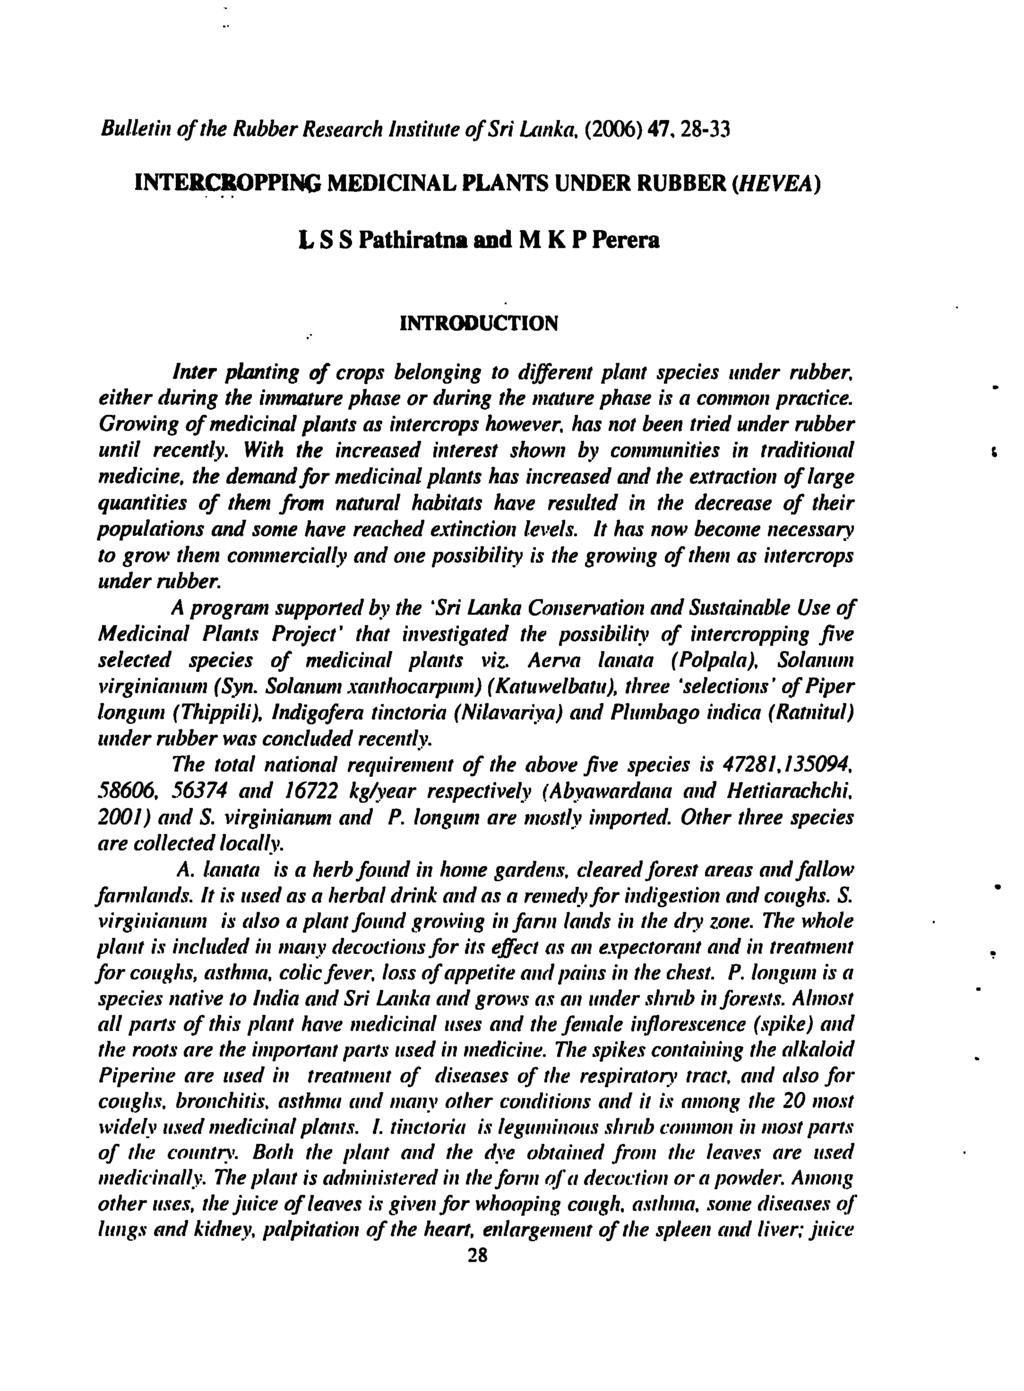 Bulletin of the Rubber Research Institute of Sri Lanka, (2006) 47, 28-33 INTERCROPPING MEDICINAL PLANTS UNDER RUBBER (HEVEA) LSS Pathiratna and M K P Perera INTRODUCTION Inter planting of crops